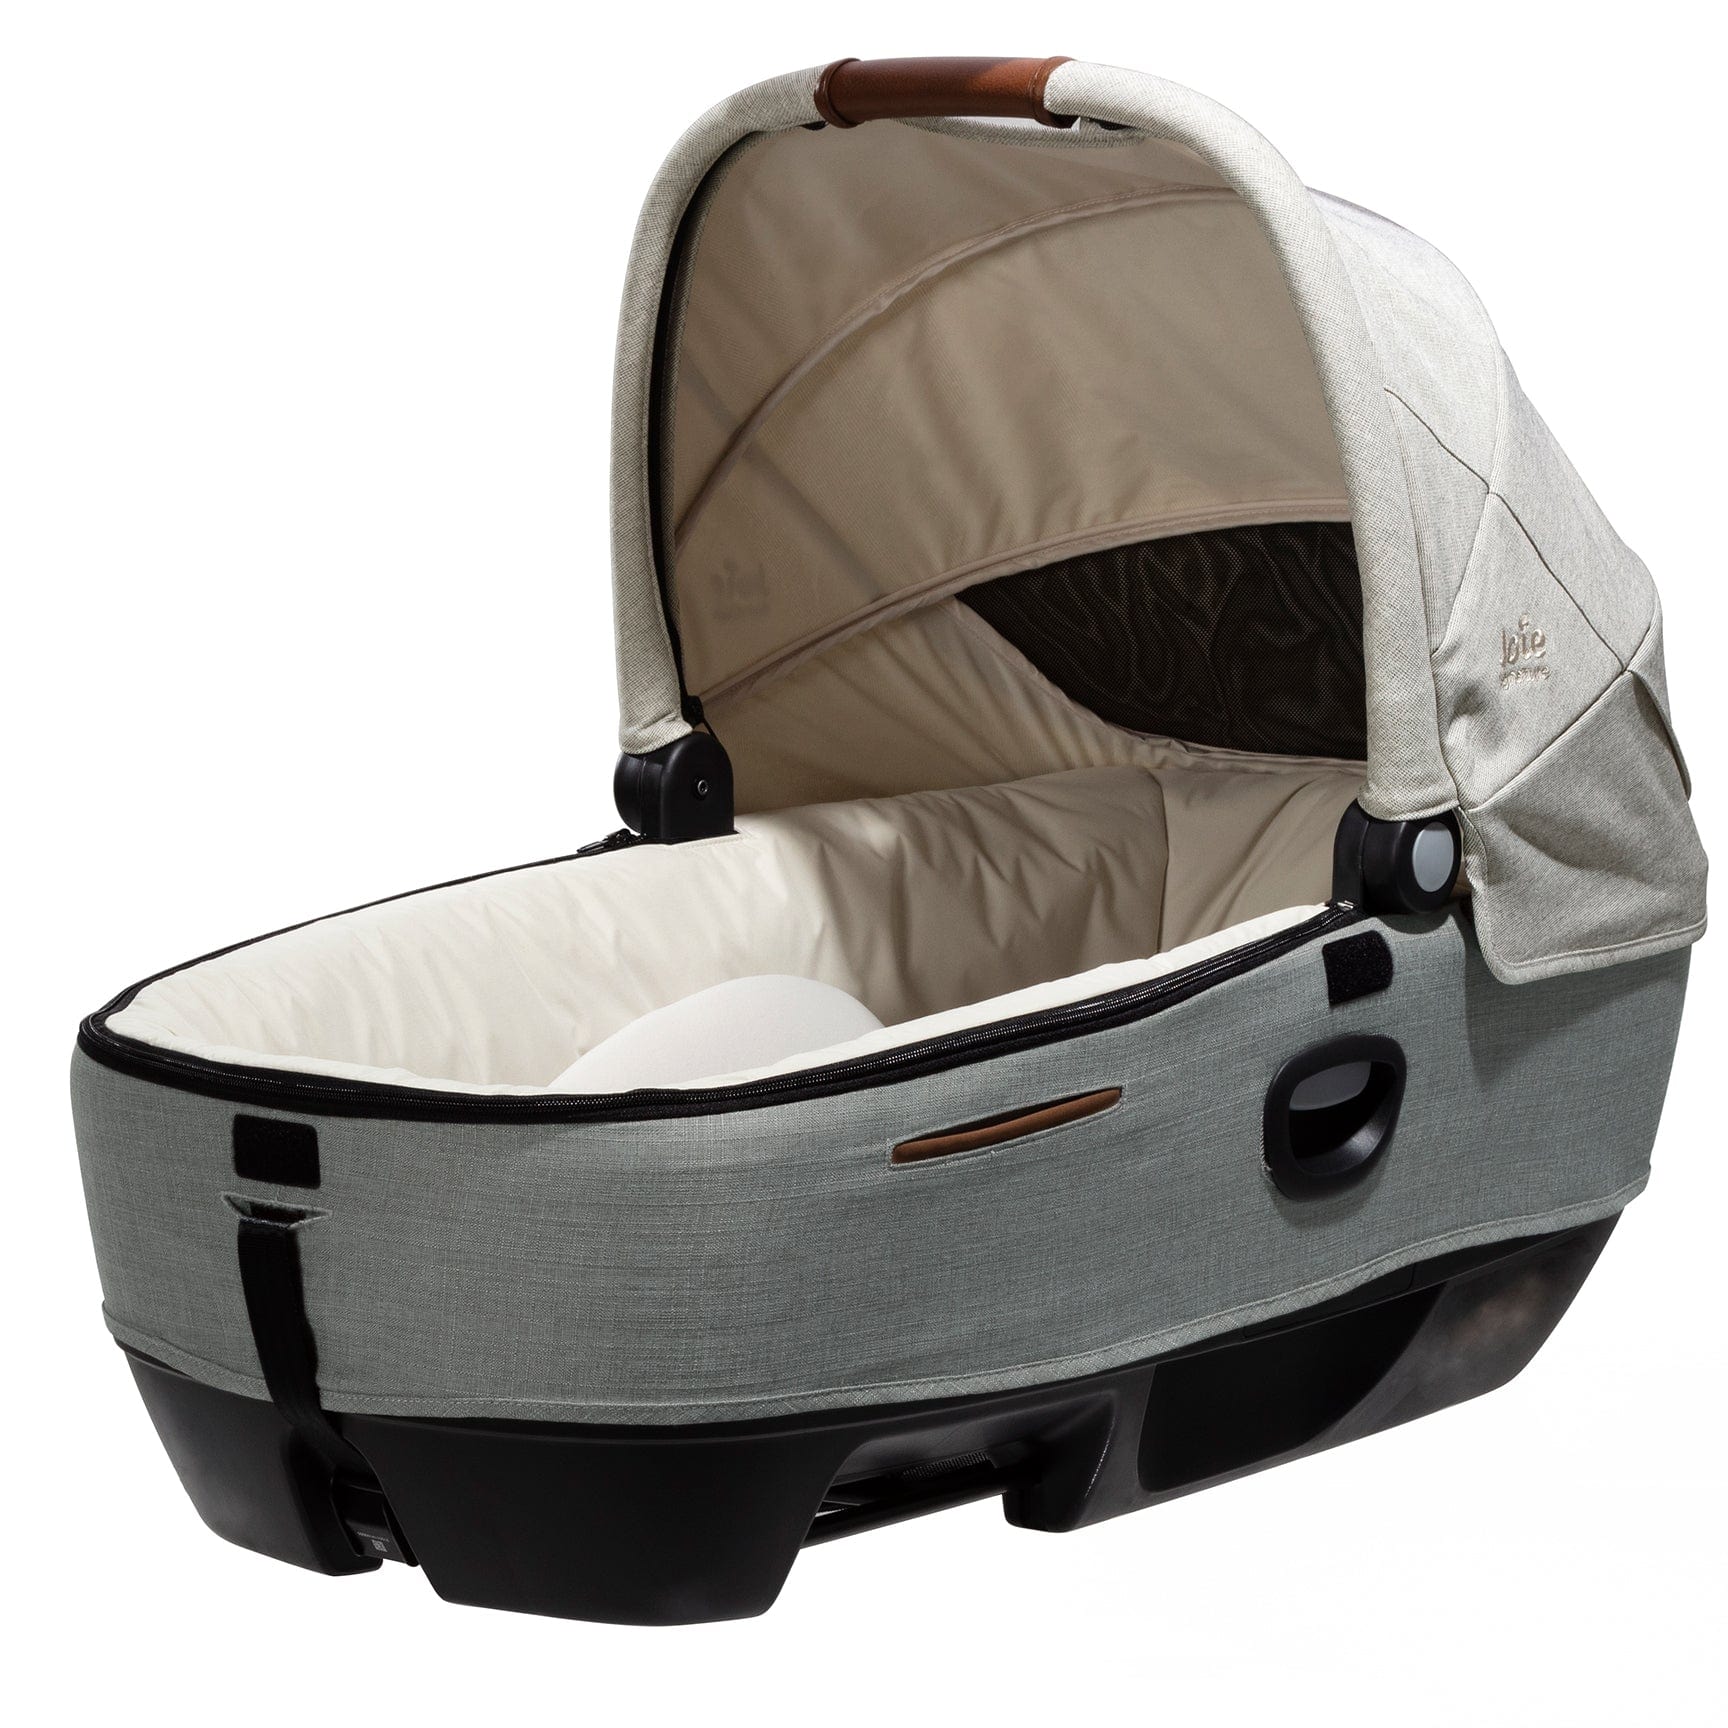 Joie Calmi Car Cot Bed in Oyster Lie Flat Car Seats C2105AAOYS000 5056080612430